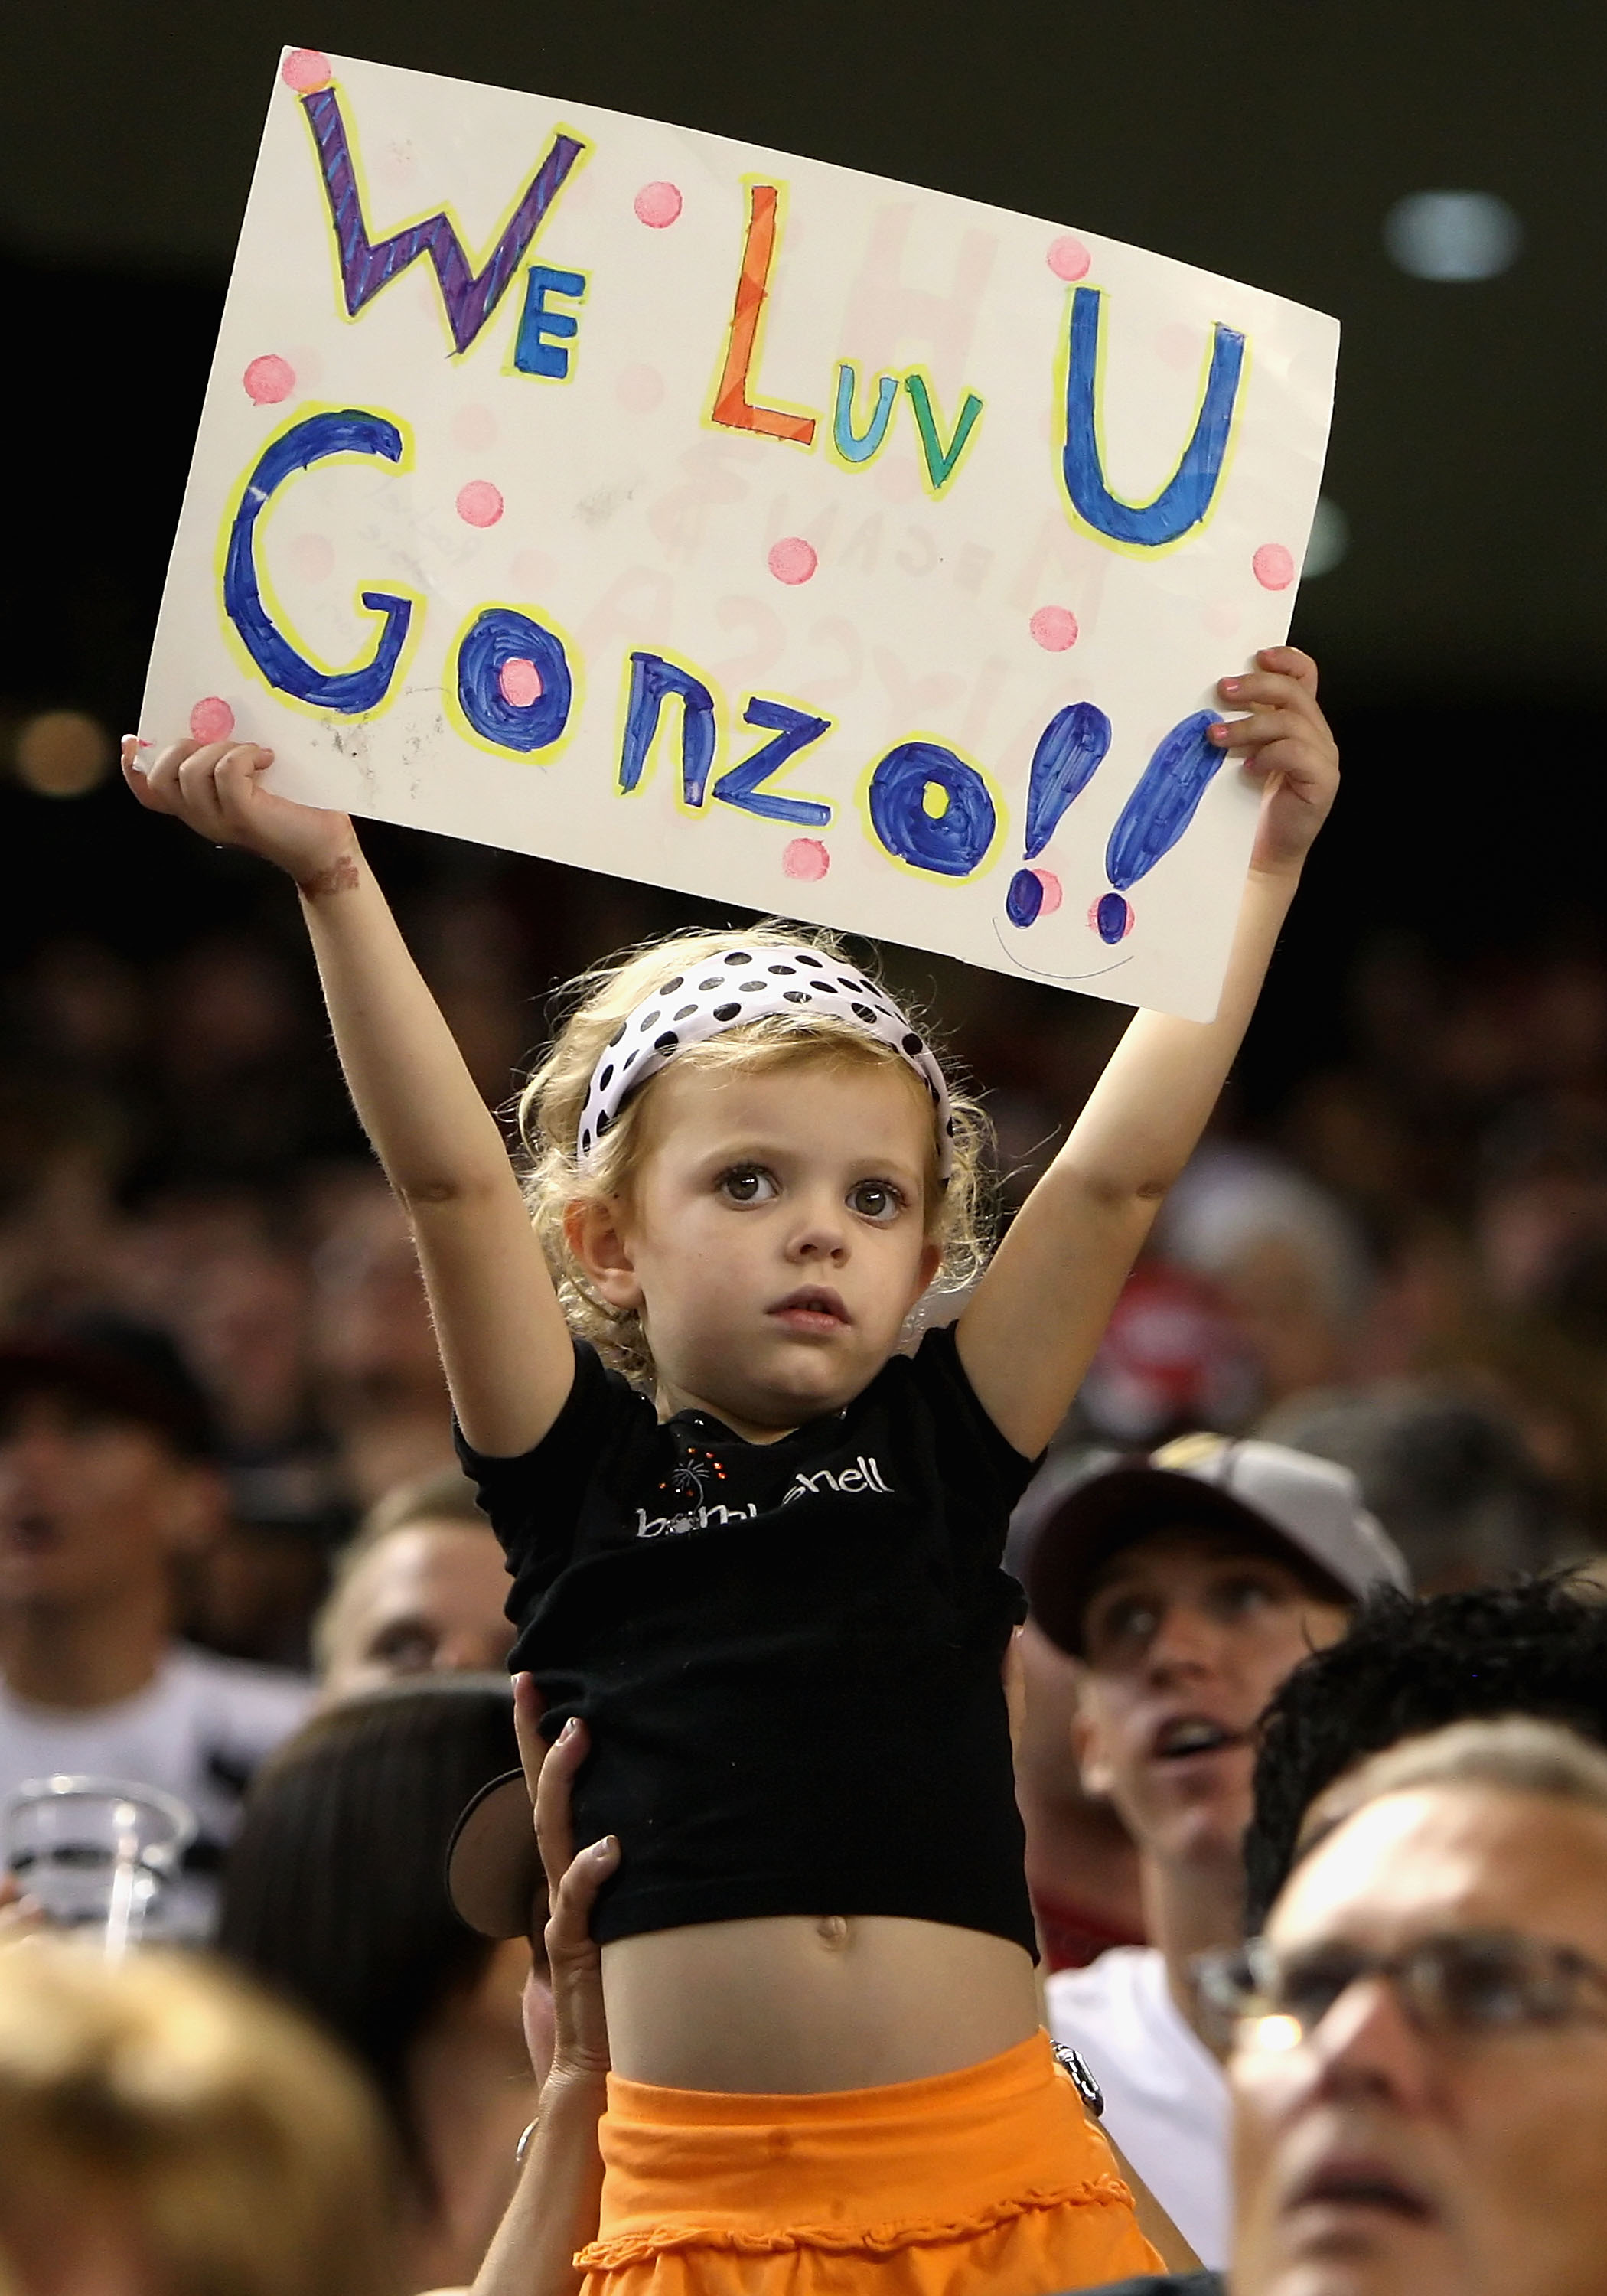 PHOENIX - AUGUST 29:  A young fan holds up a sign on Luis Gonzalez Appreciation Night during the major league baseball game between the Houston Astros and the Arizona Diamondbacks at Chase Field on August 29, 2009 in Phoenix, Arizona.  (Photo by Christian